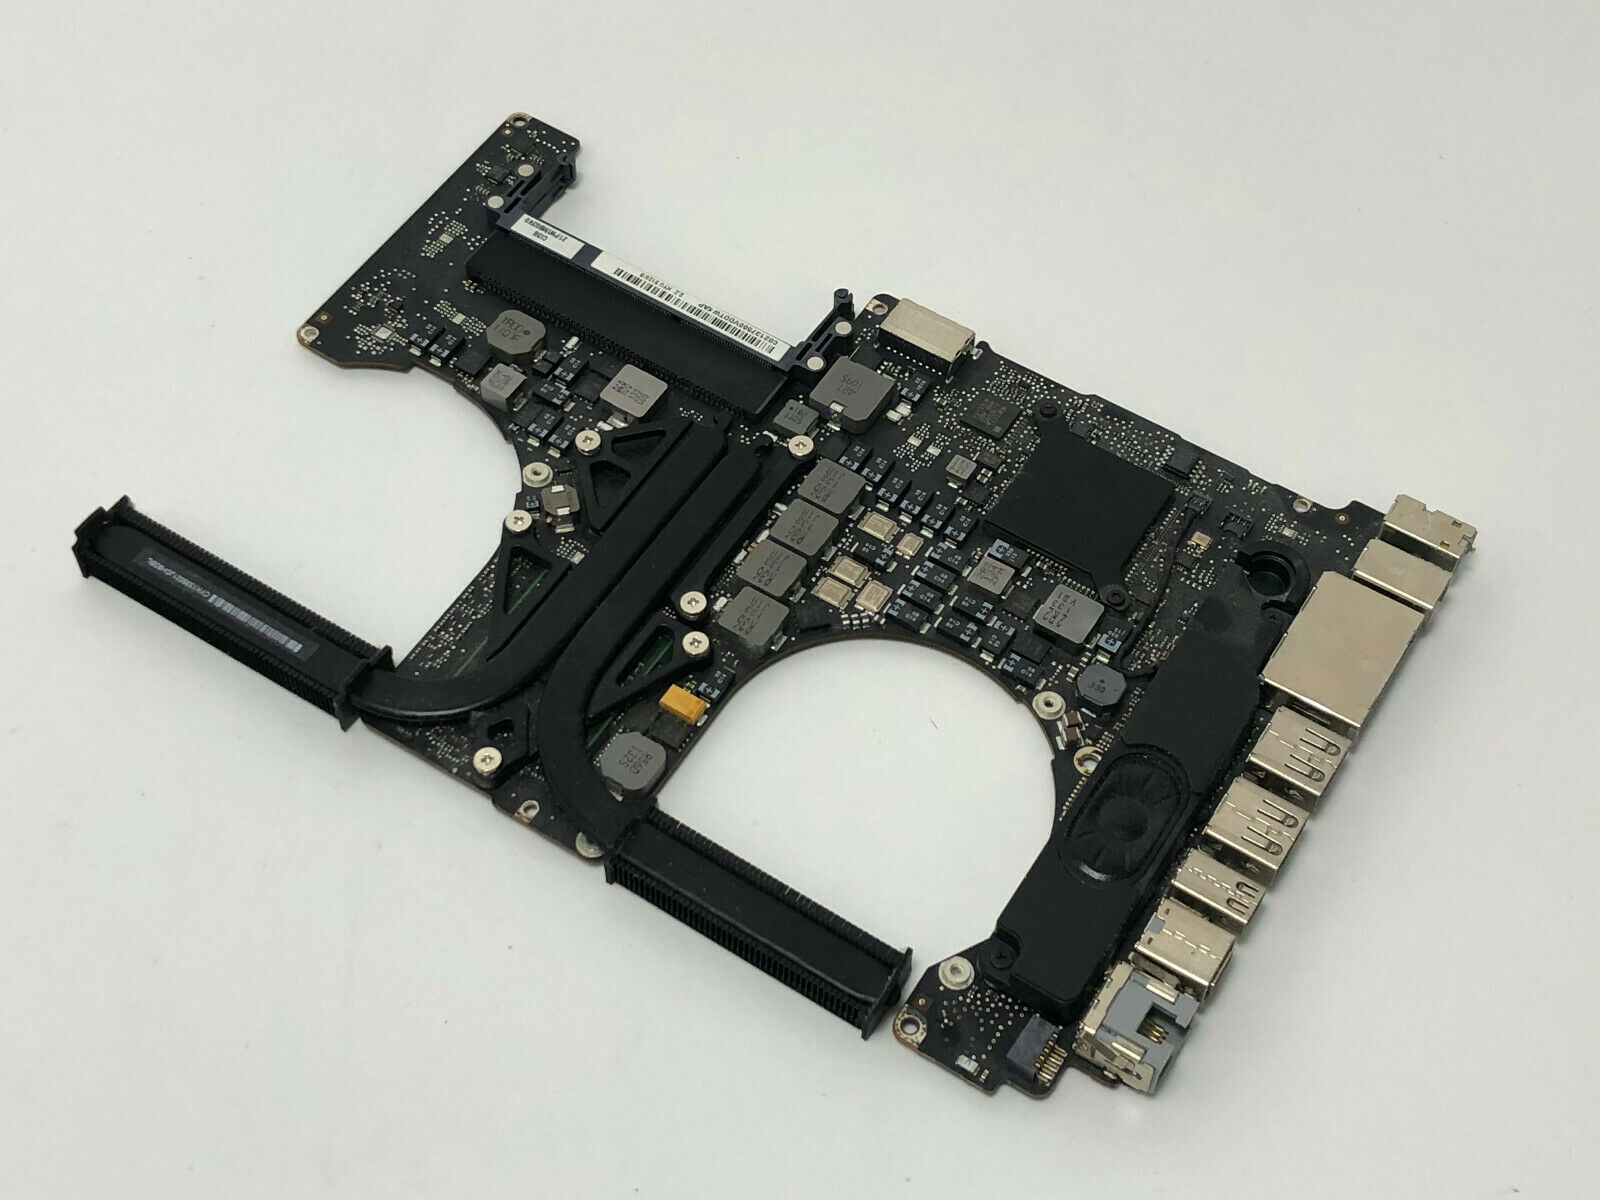 mid 2010 a1286 logic board replacement ifixit